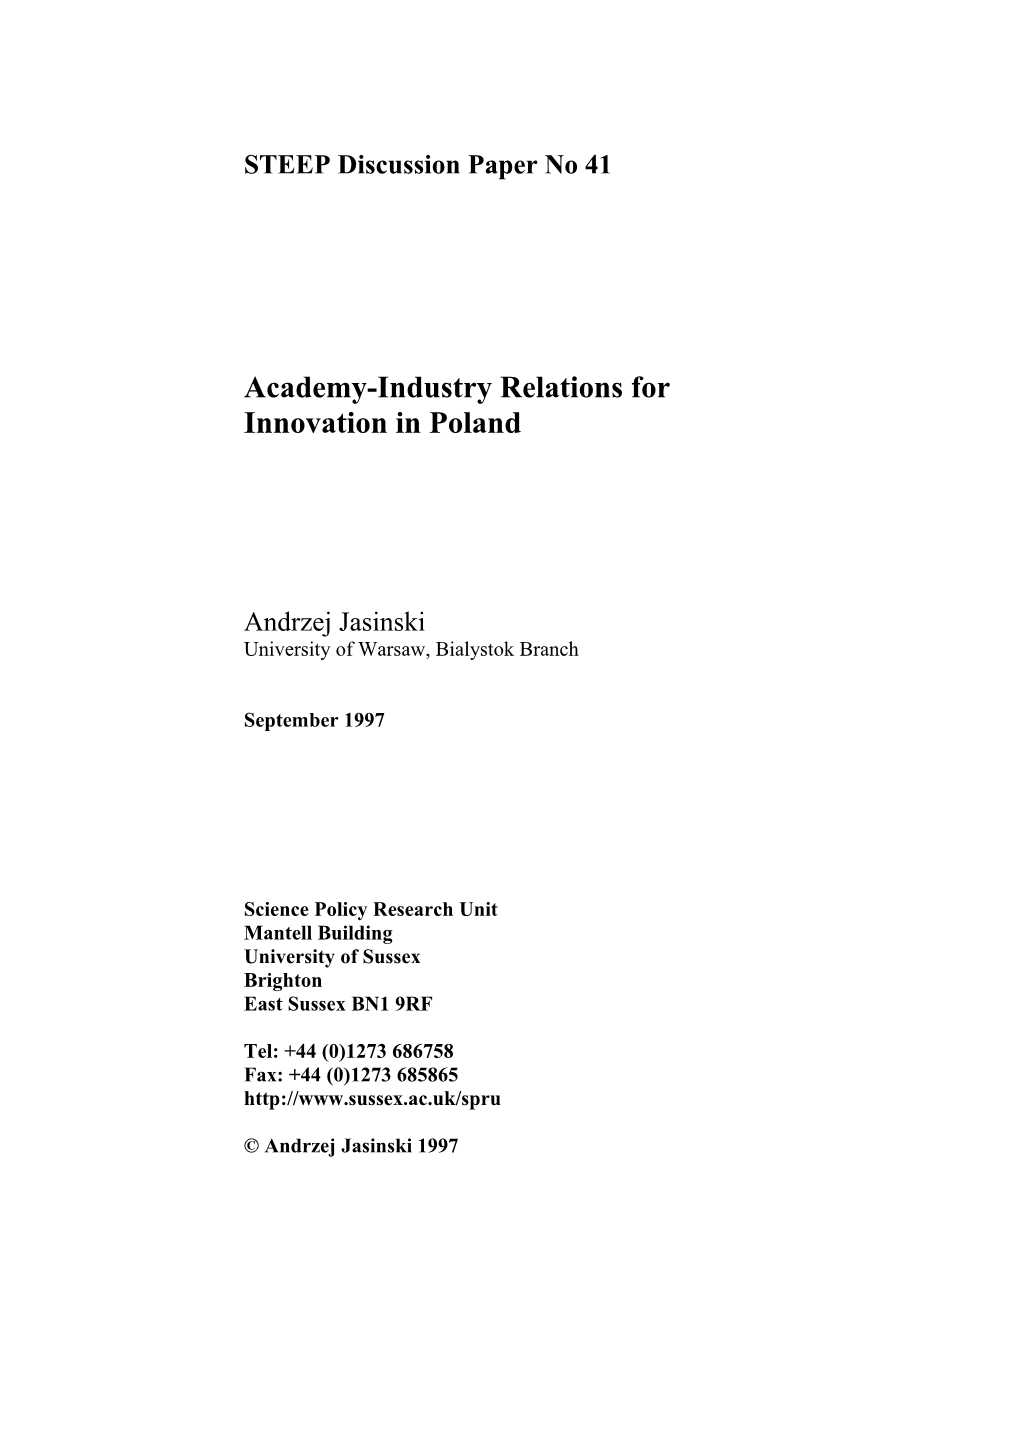 Academy-Industry Relations for Innovation in Poland